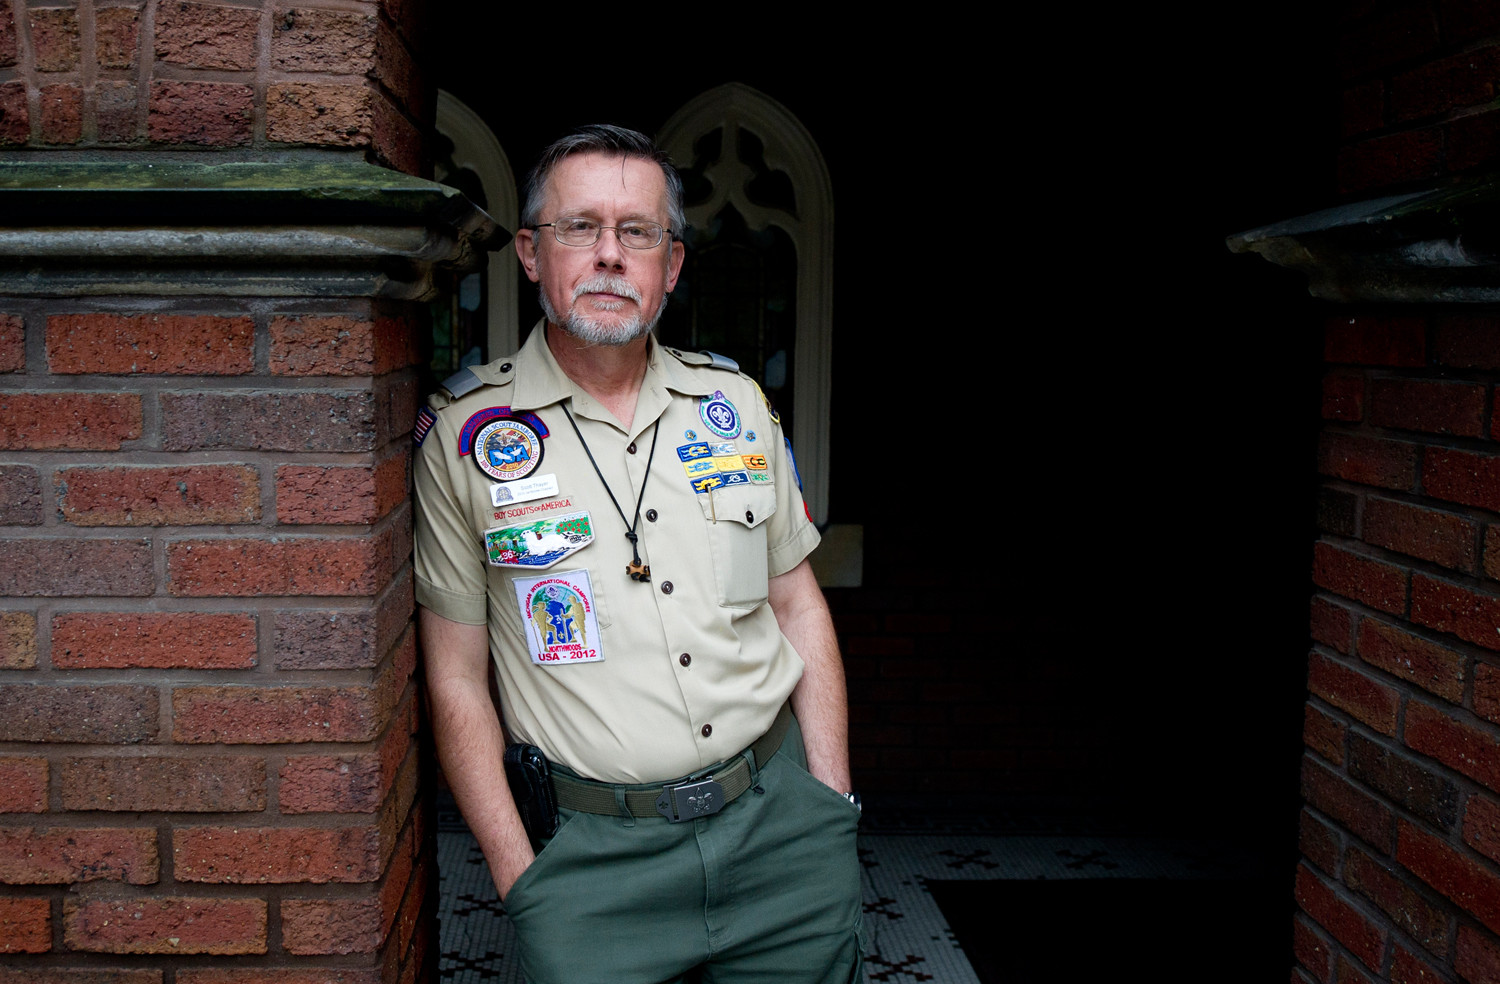 Gravely distressed Religion looms large over Boy Scouts decision on gays